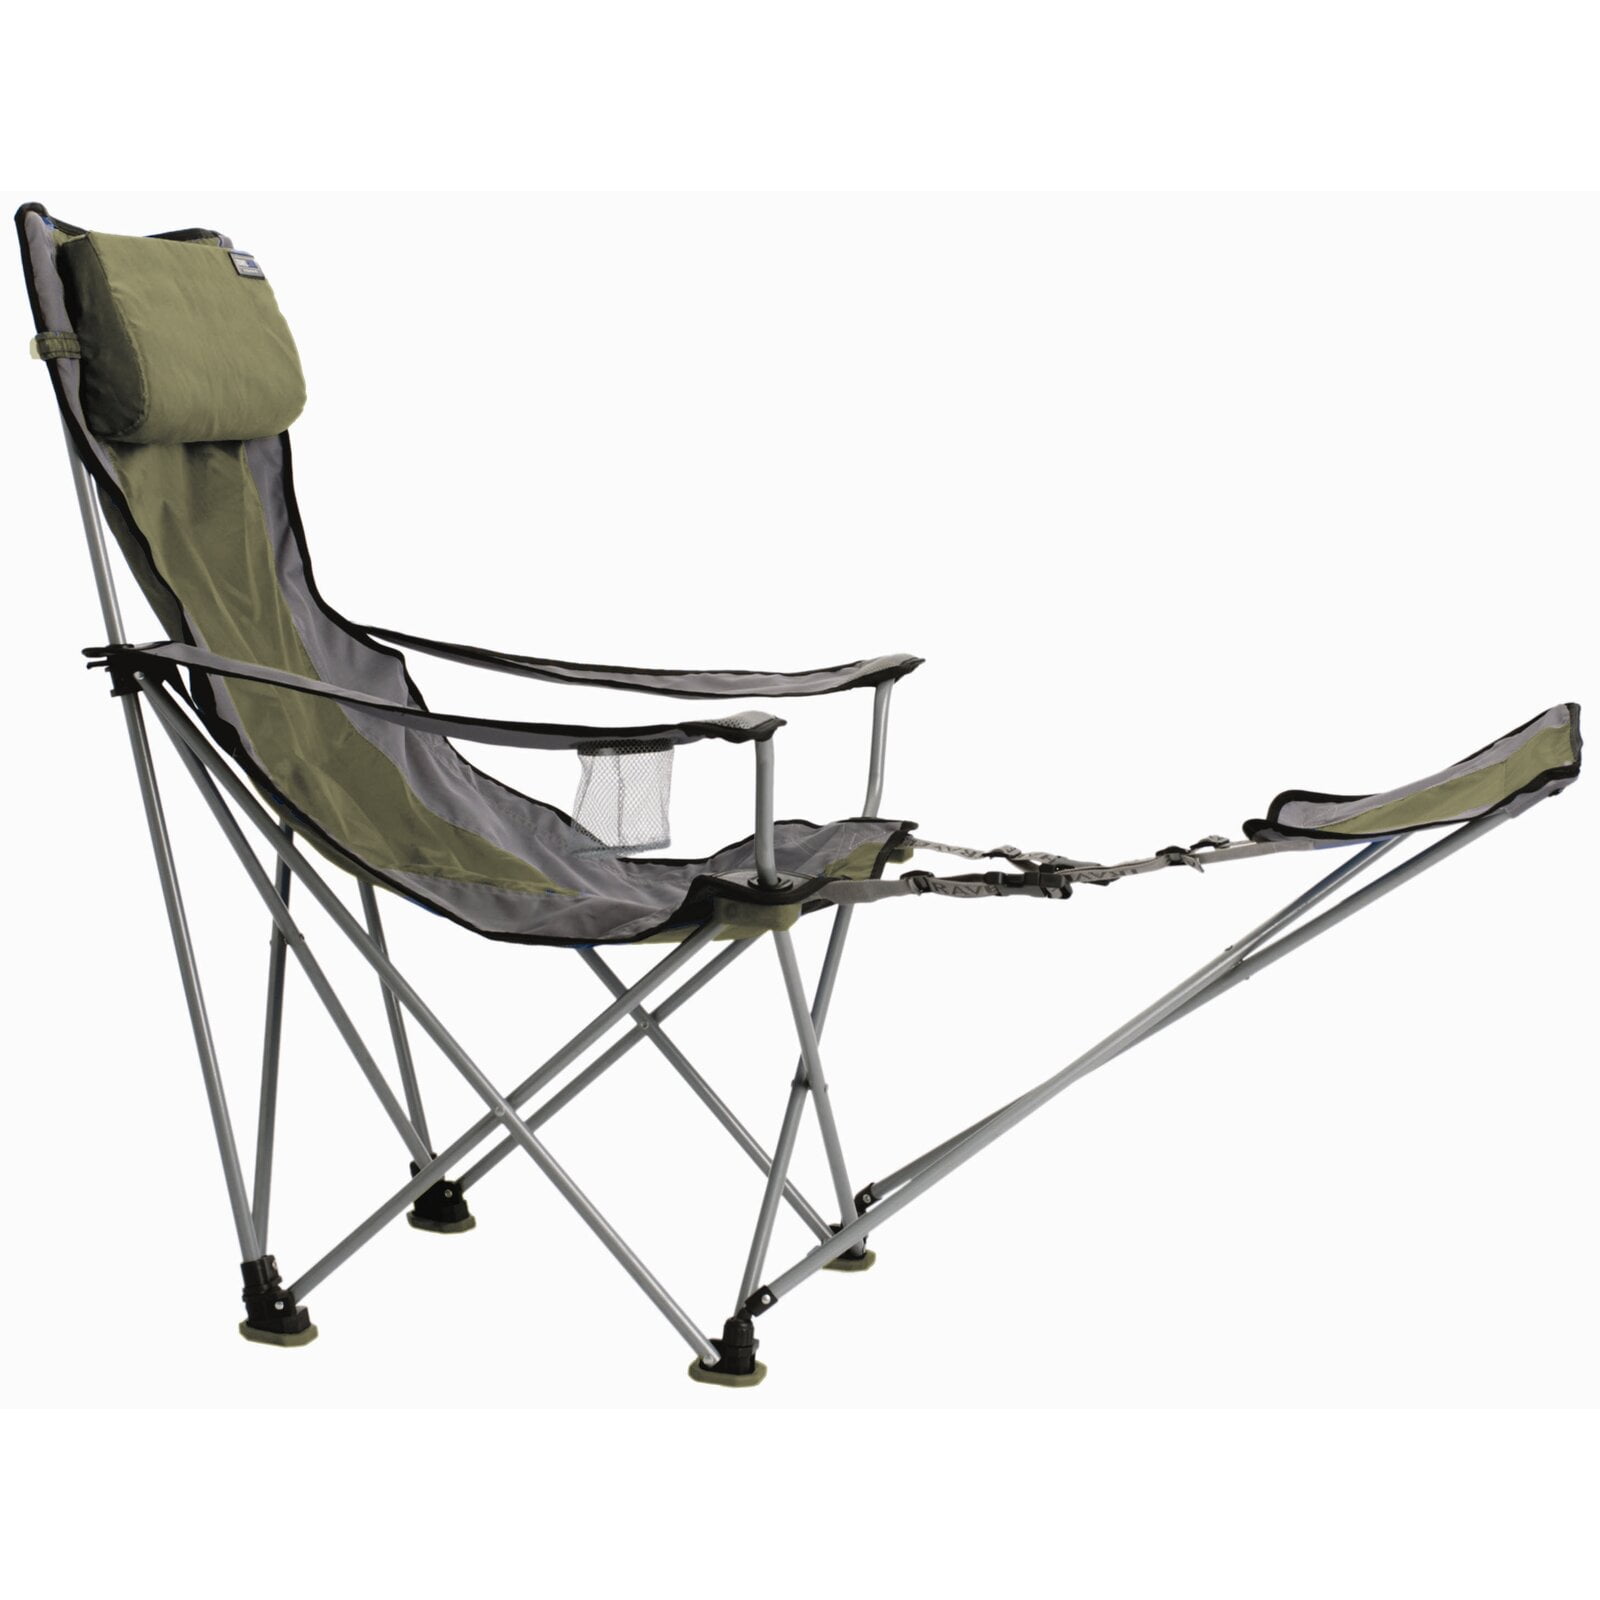 Superb Folding Camping Chair with Cup Holder Steel Frame & Woven Polyester Seat. 